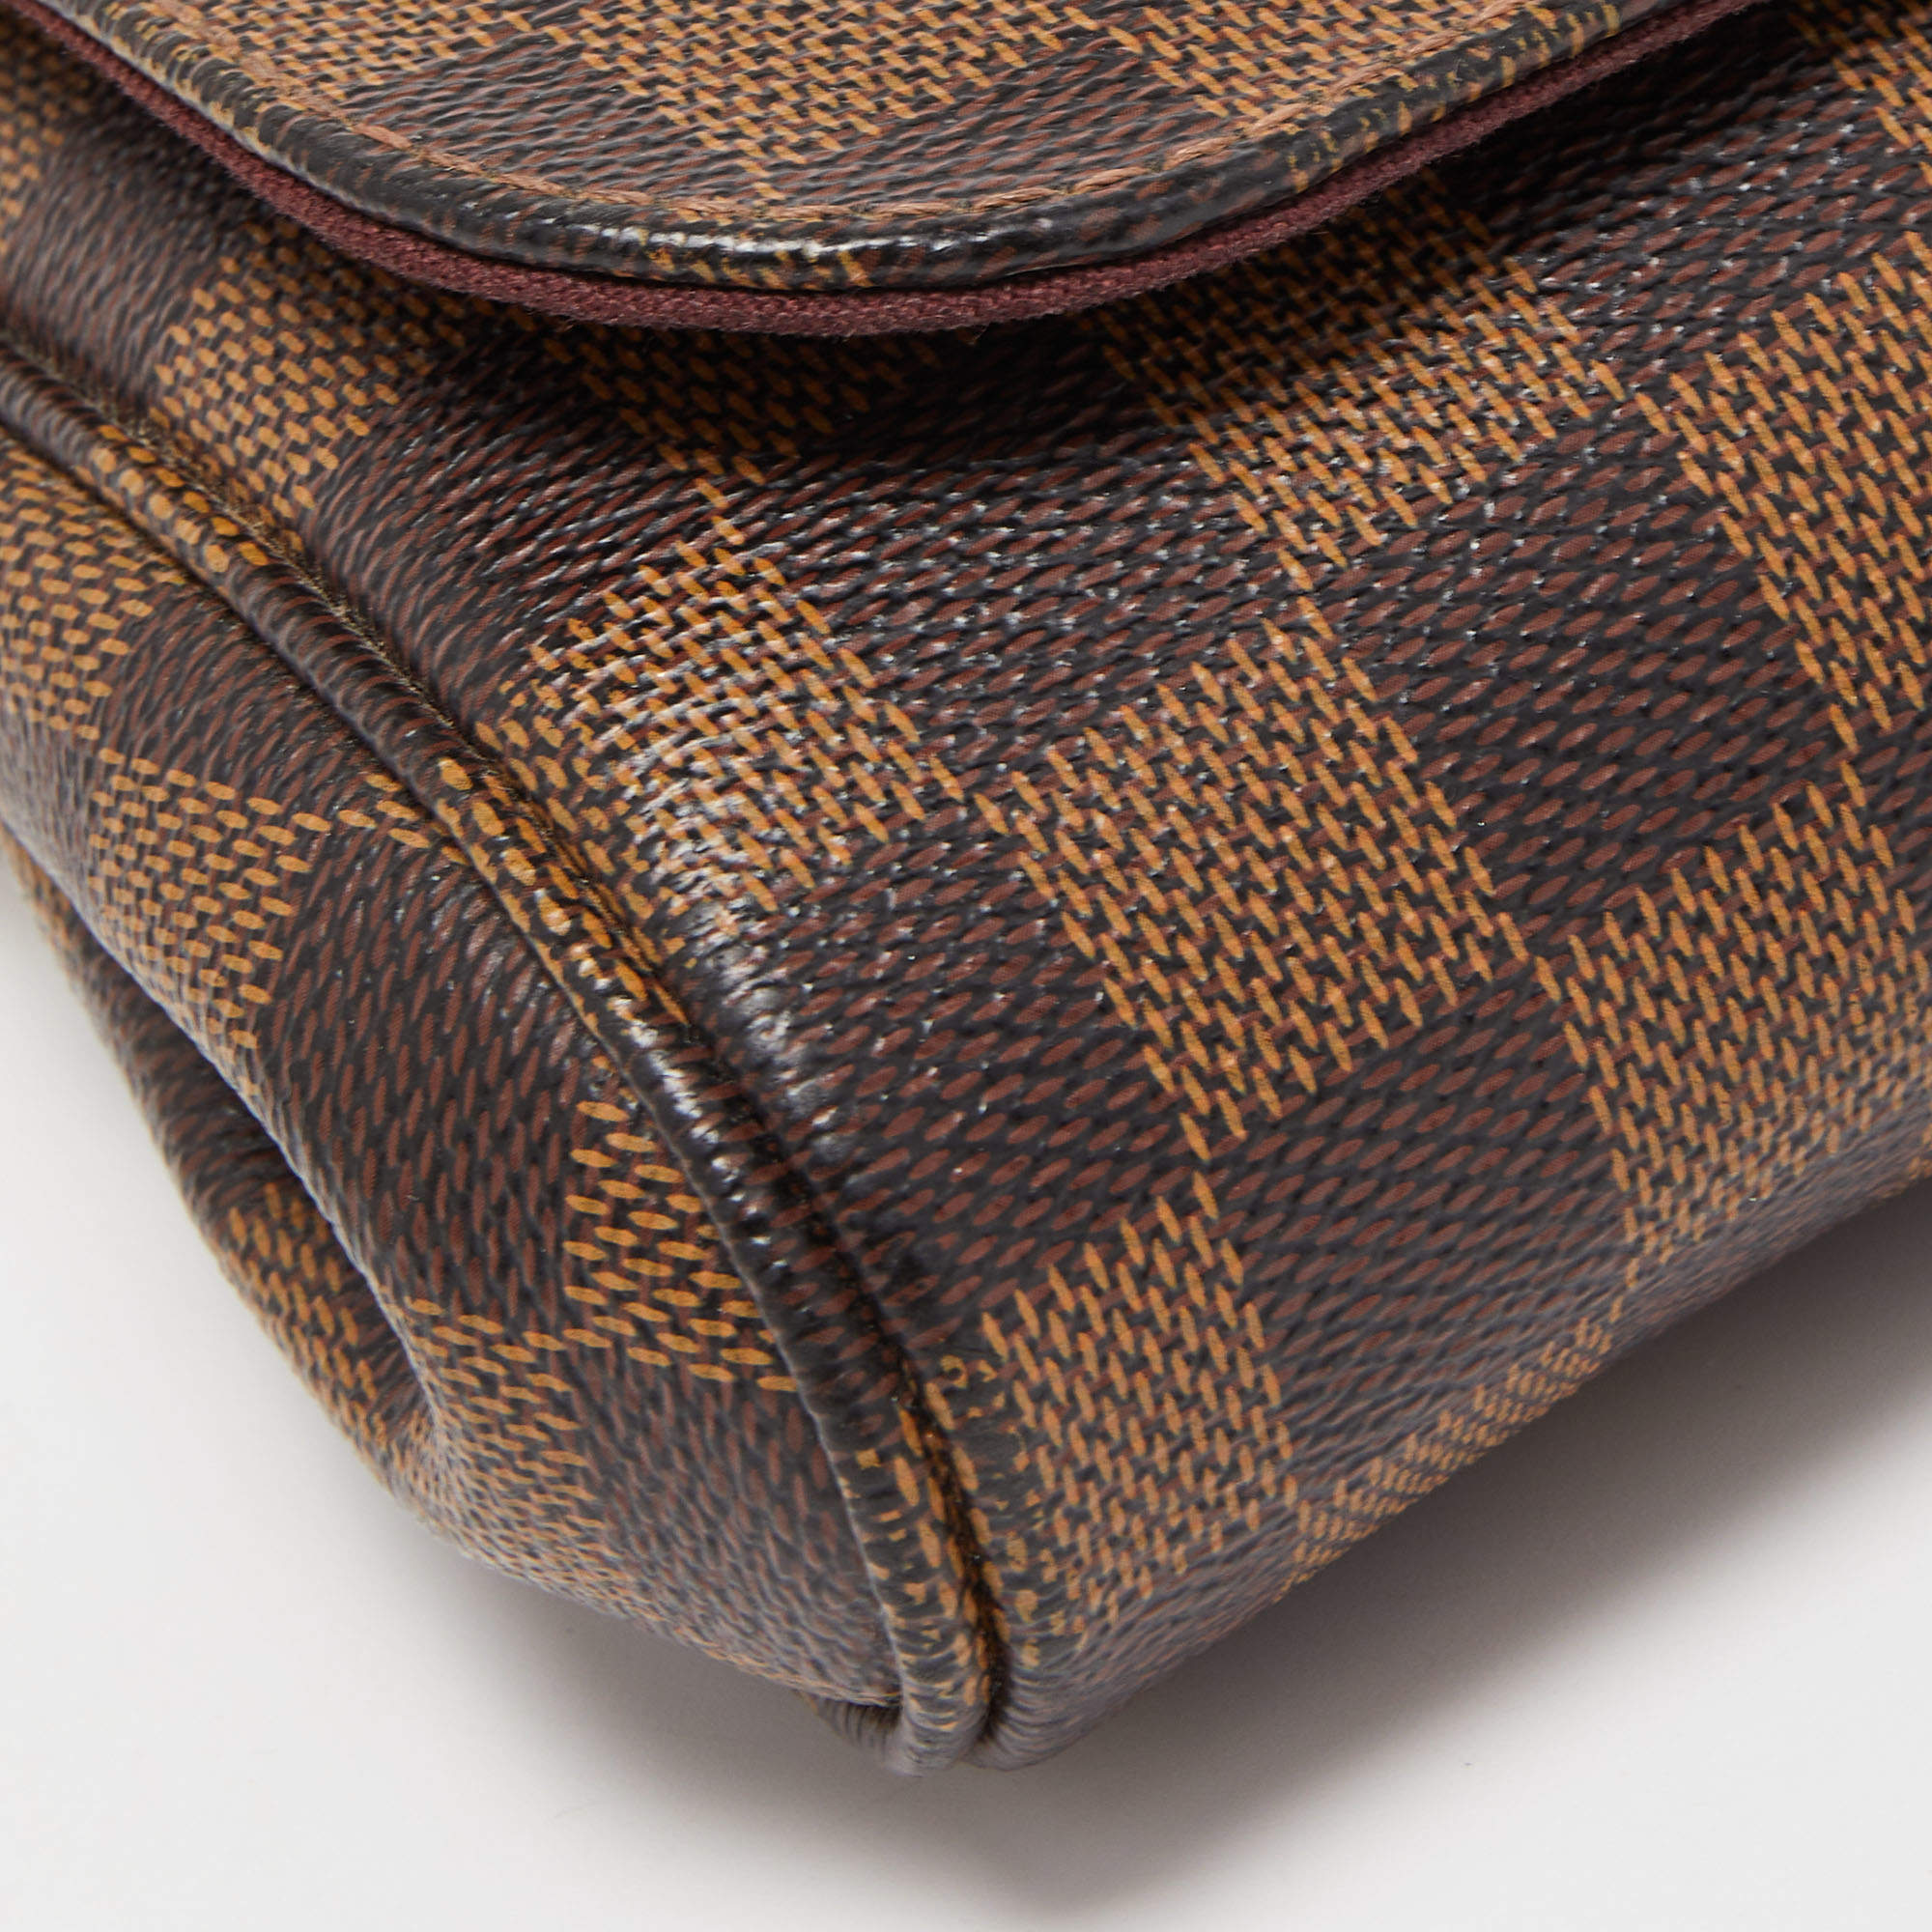 Date Code & Stamp] Louis Vuitton Damier Musette Tango